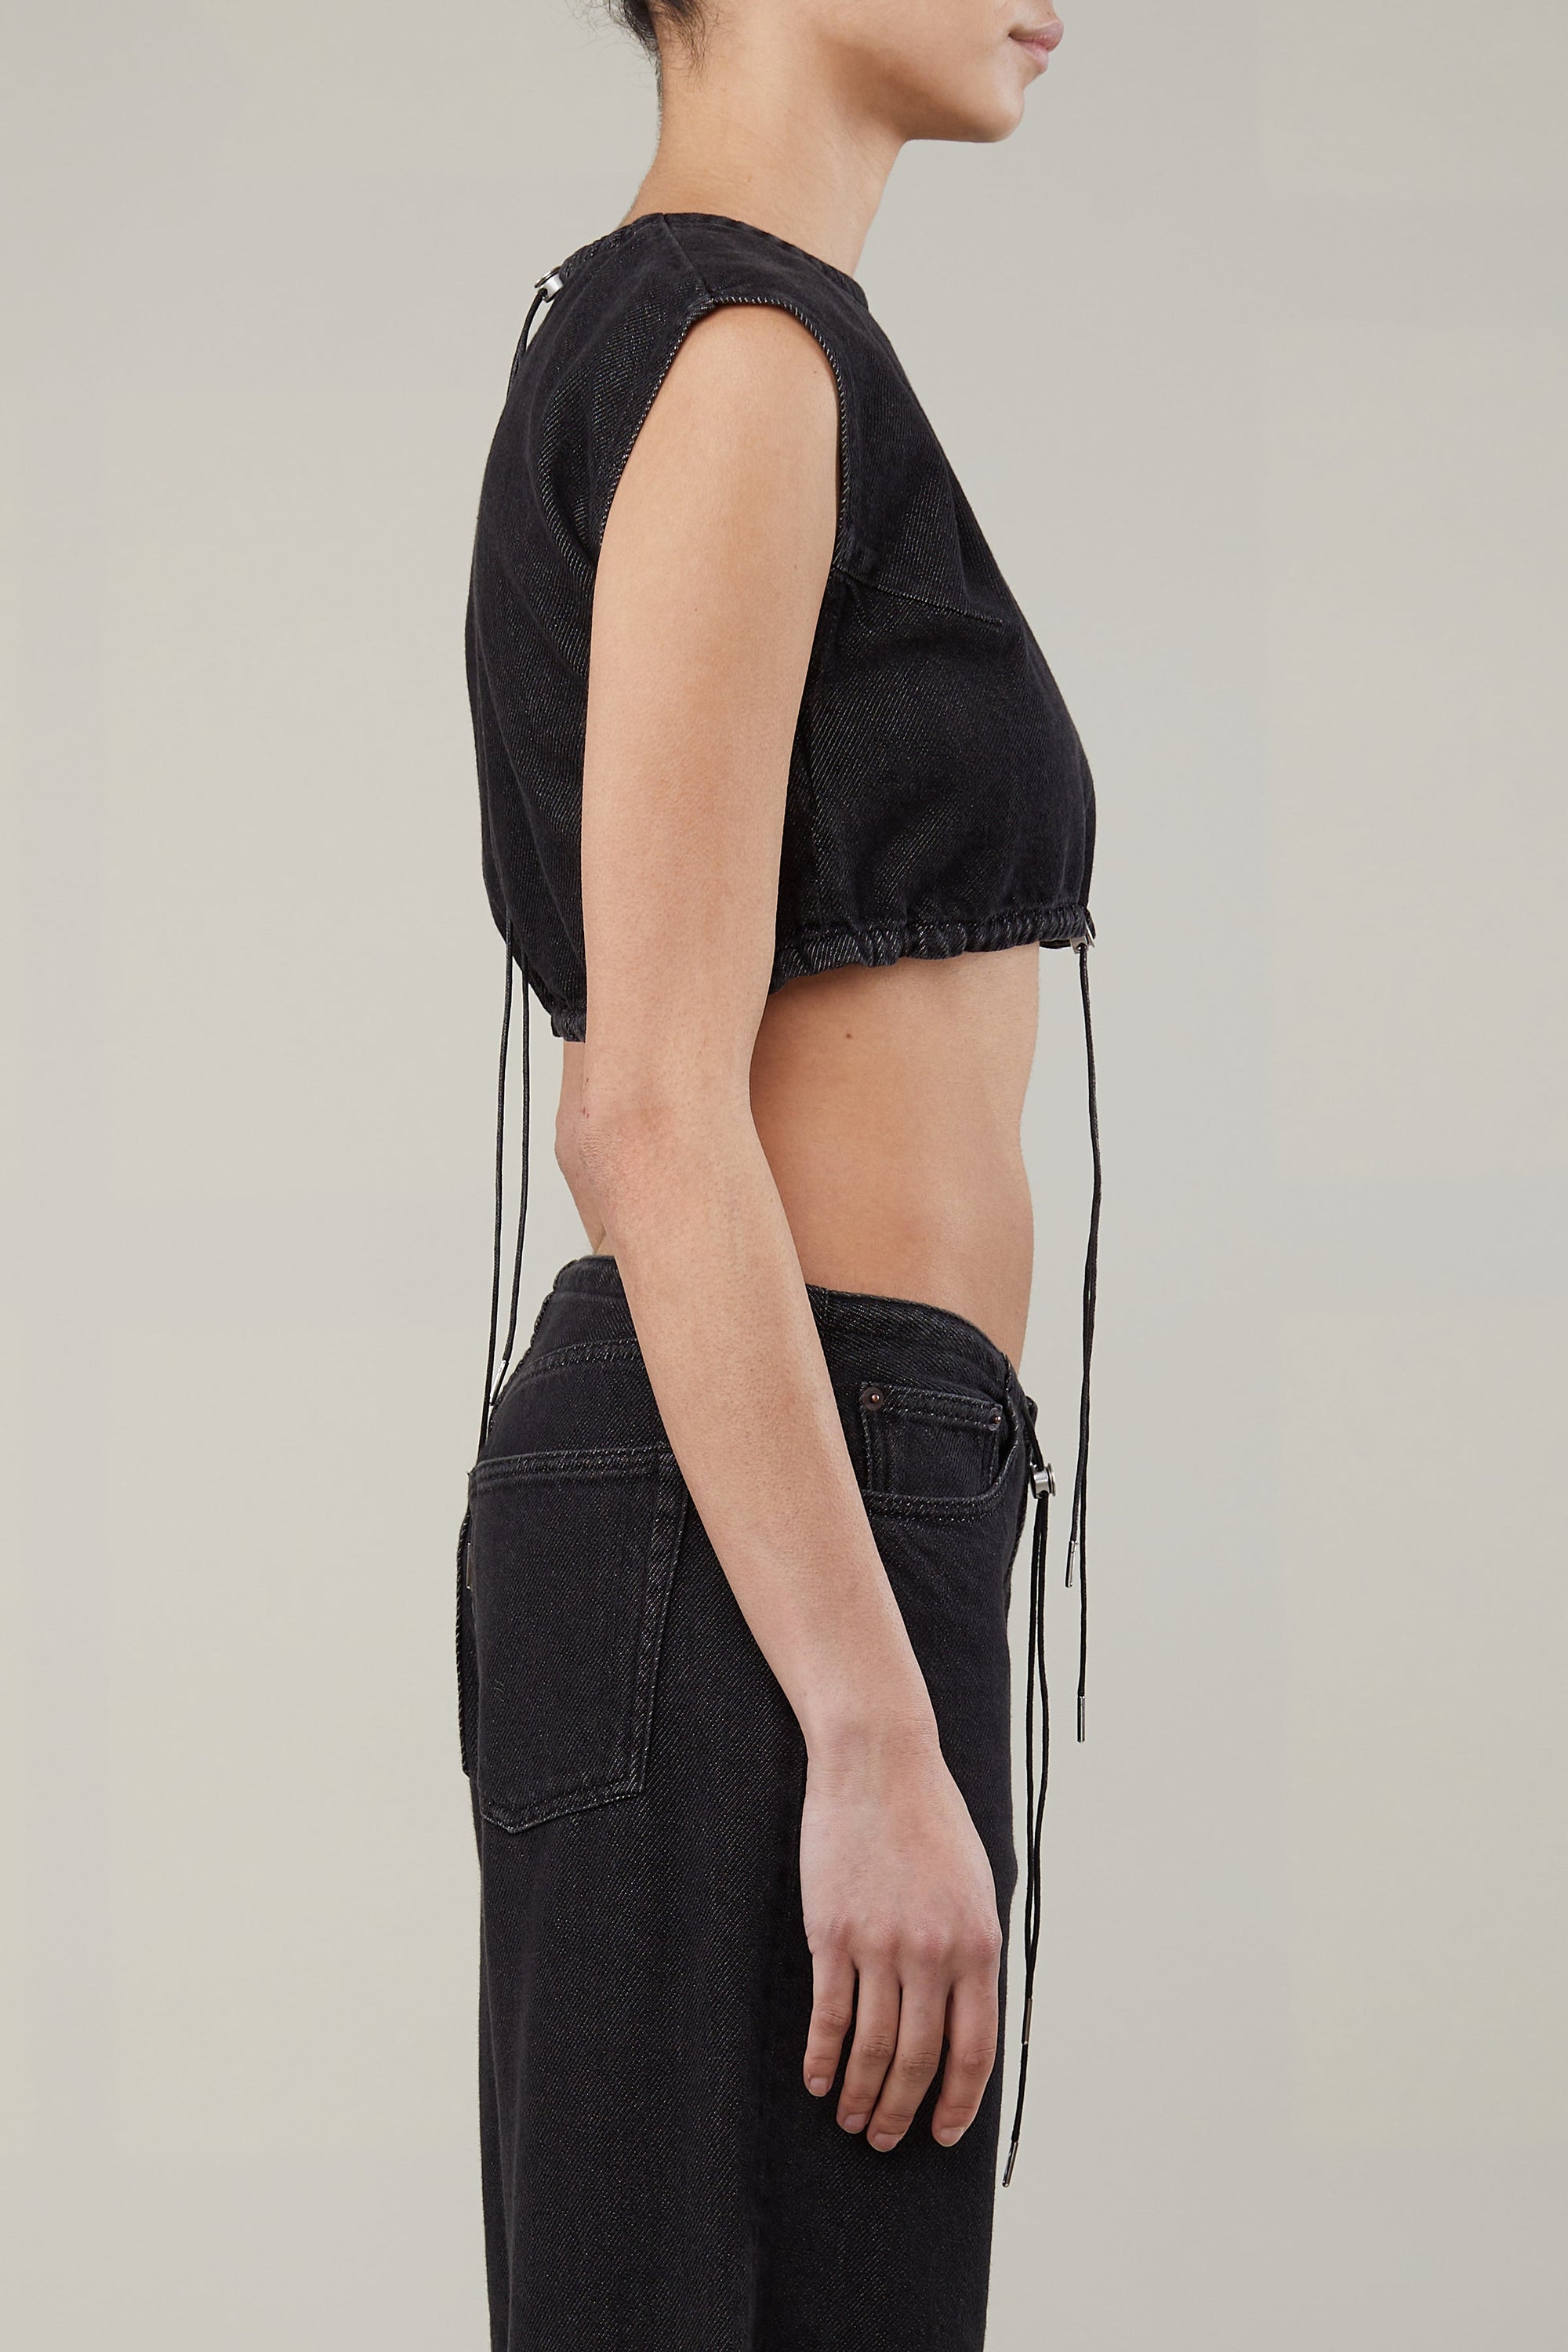 Still Here NYC Cool Crop Top washed black Boxy denim | Pipe and Row